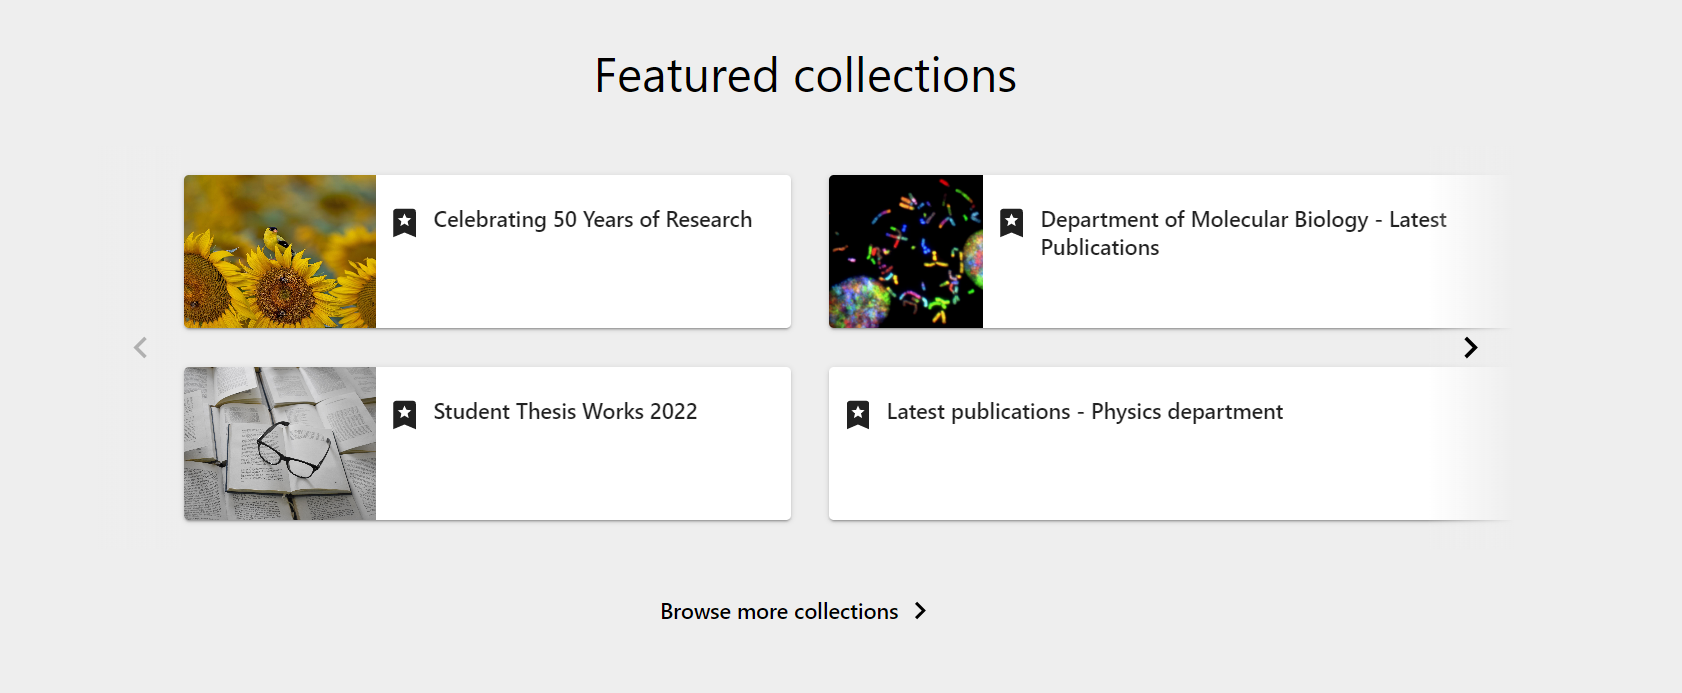 Featured collections on the portal.